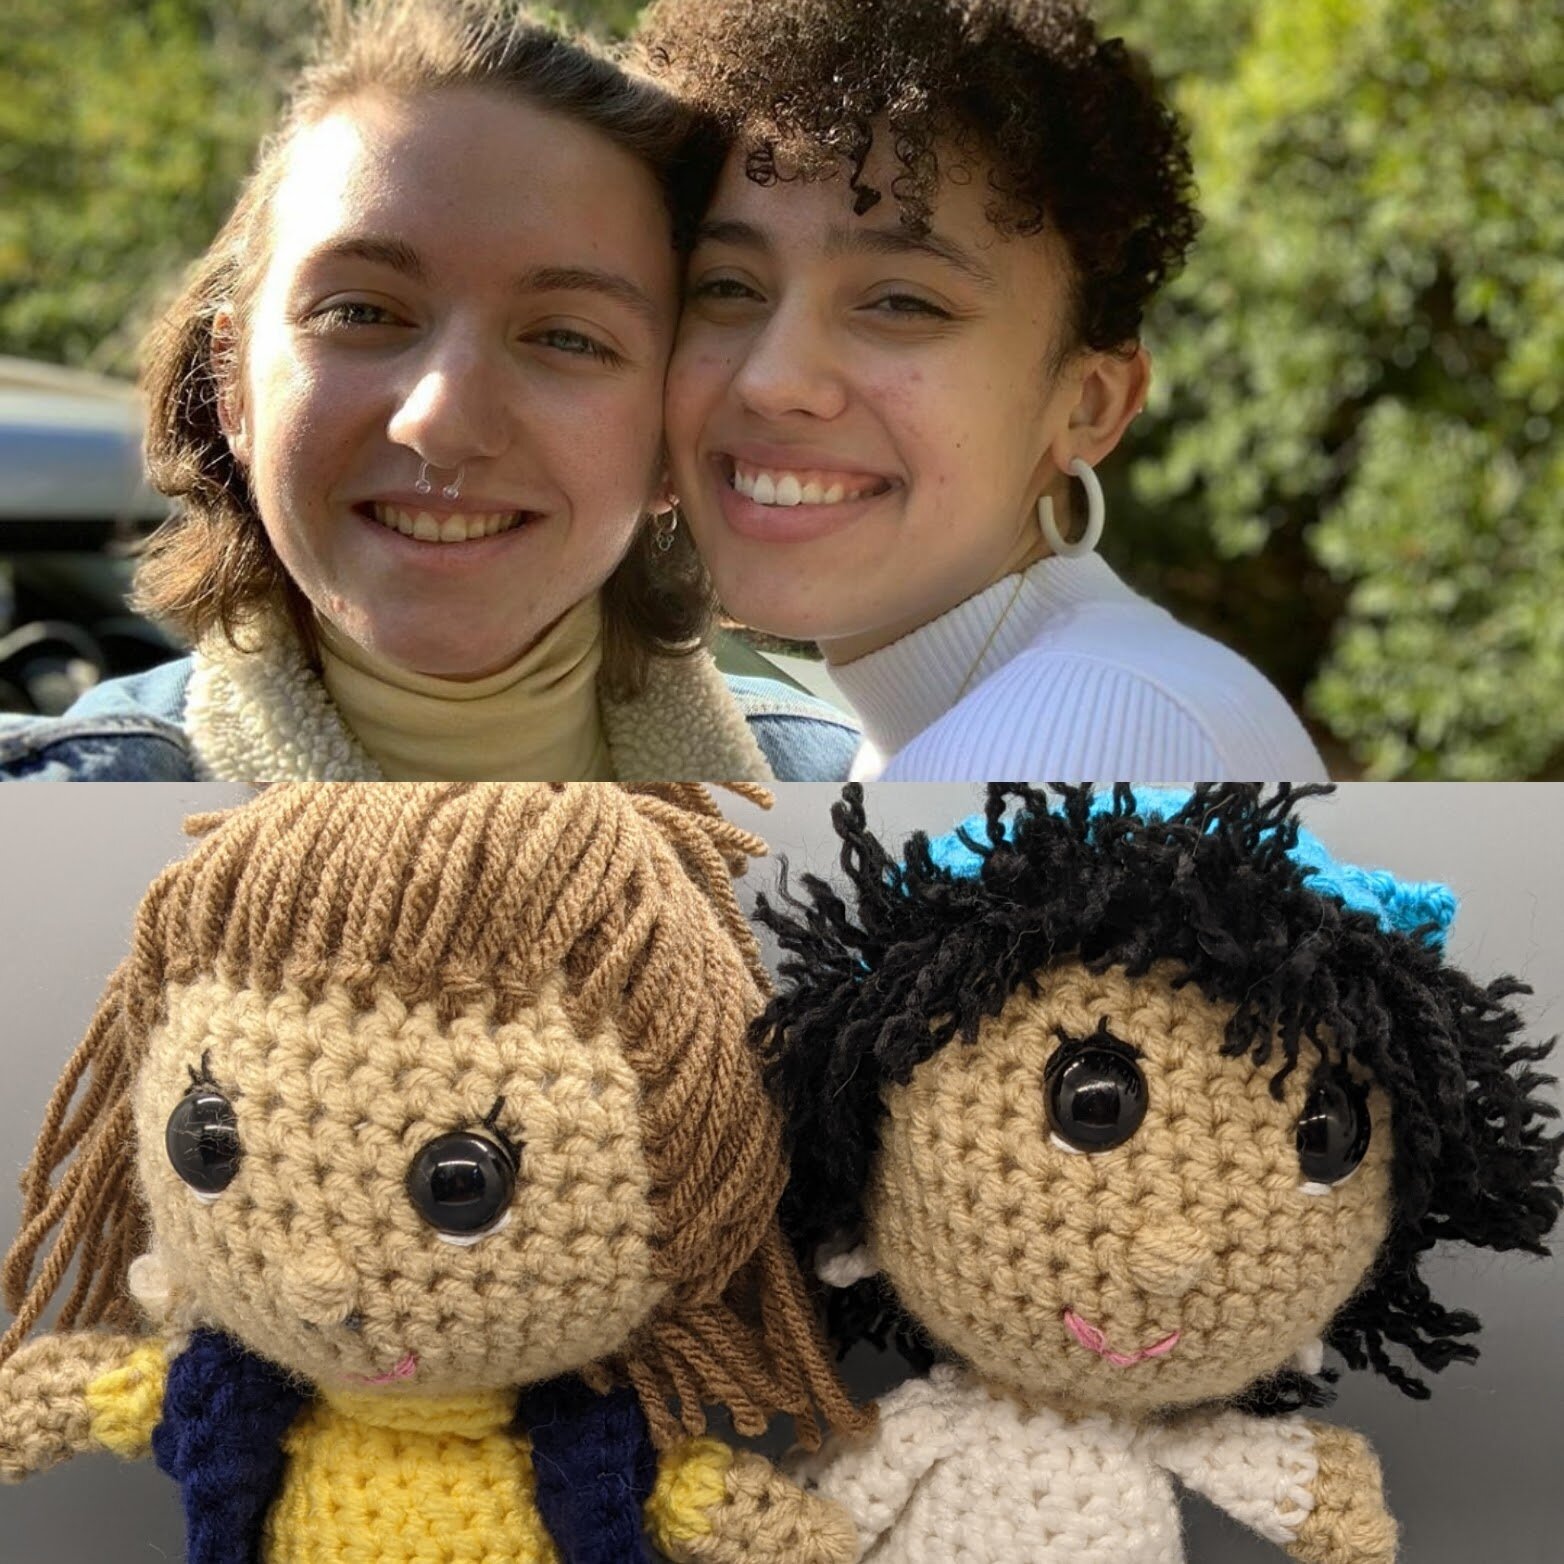 A real life human couple on top and a crocheted version of the couple on the bottom